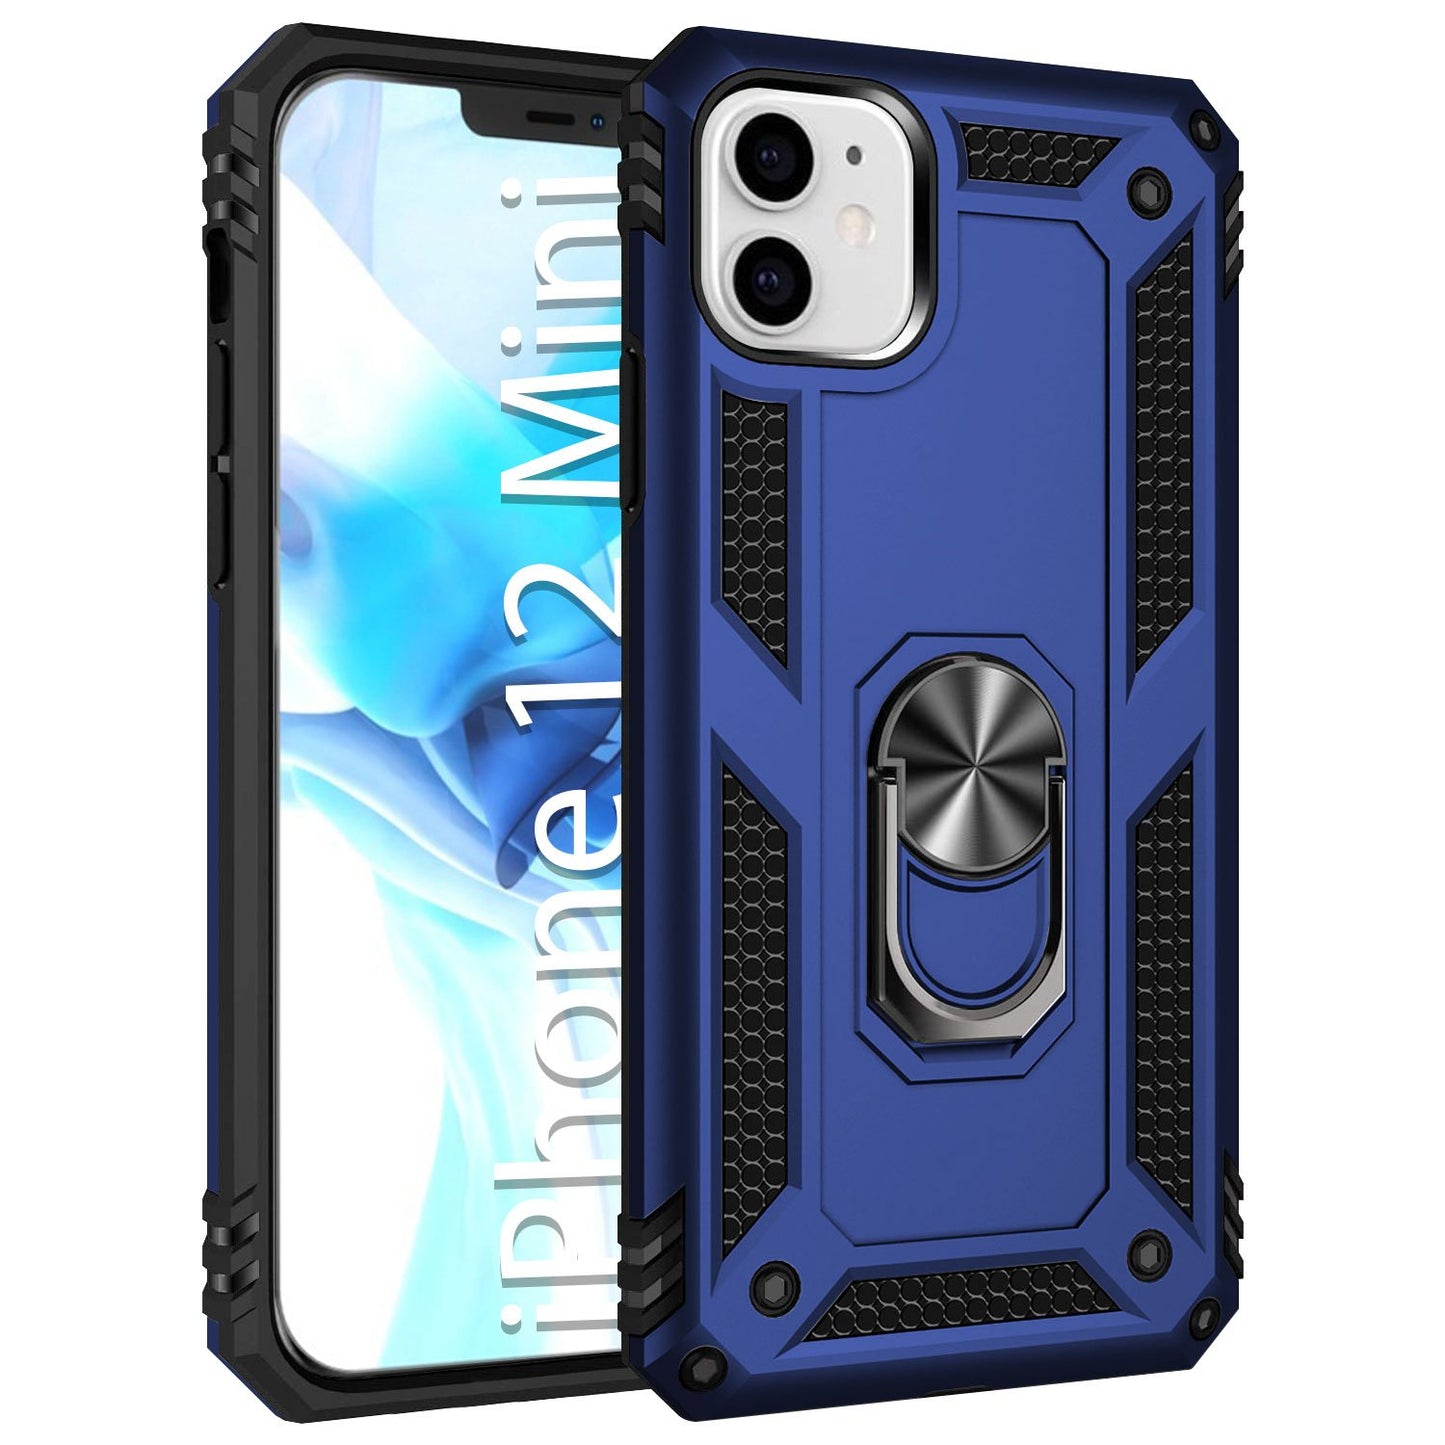 CCIPH12IFBL - iPhone 12 Mini Combo Case, Shockproof Case with Built in Ring, Kickstand and Magnet for Car Mounts Compatible to Apple iPhone 12 Mini